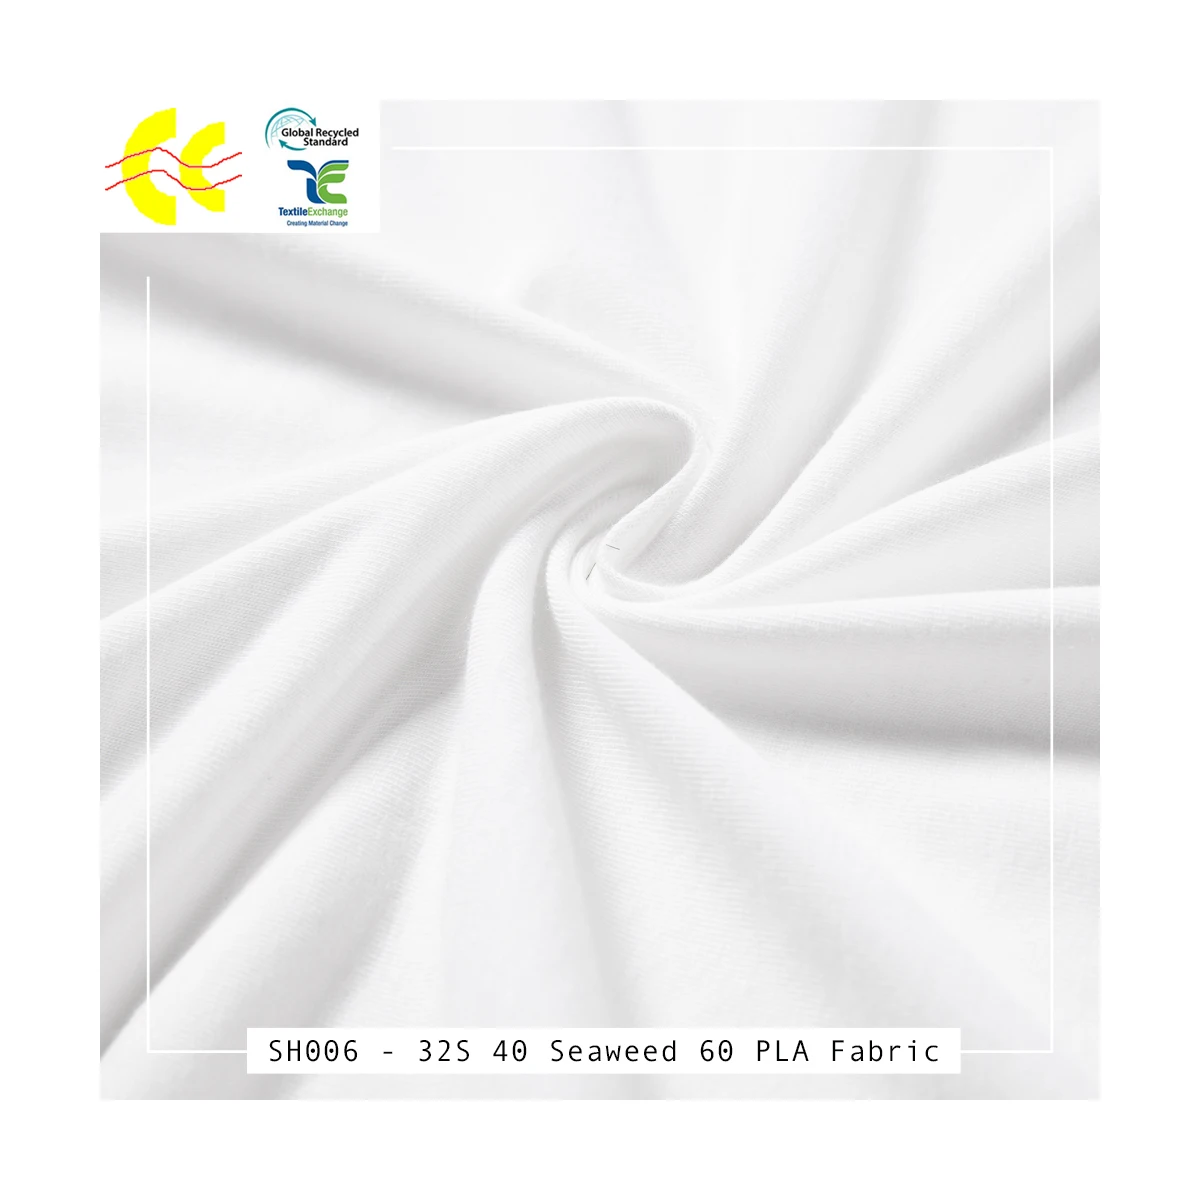 Best Selling Eco friendly 32S 40 Seaweed 60 PLA Blended Knitted Fabric For T Shirt and Home Wear